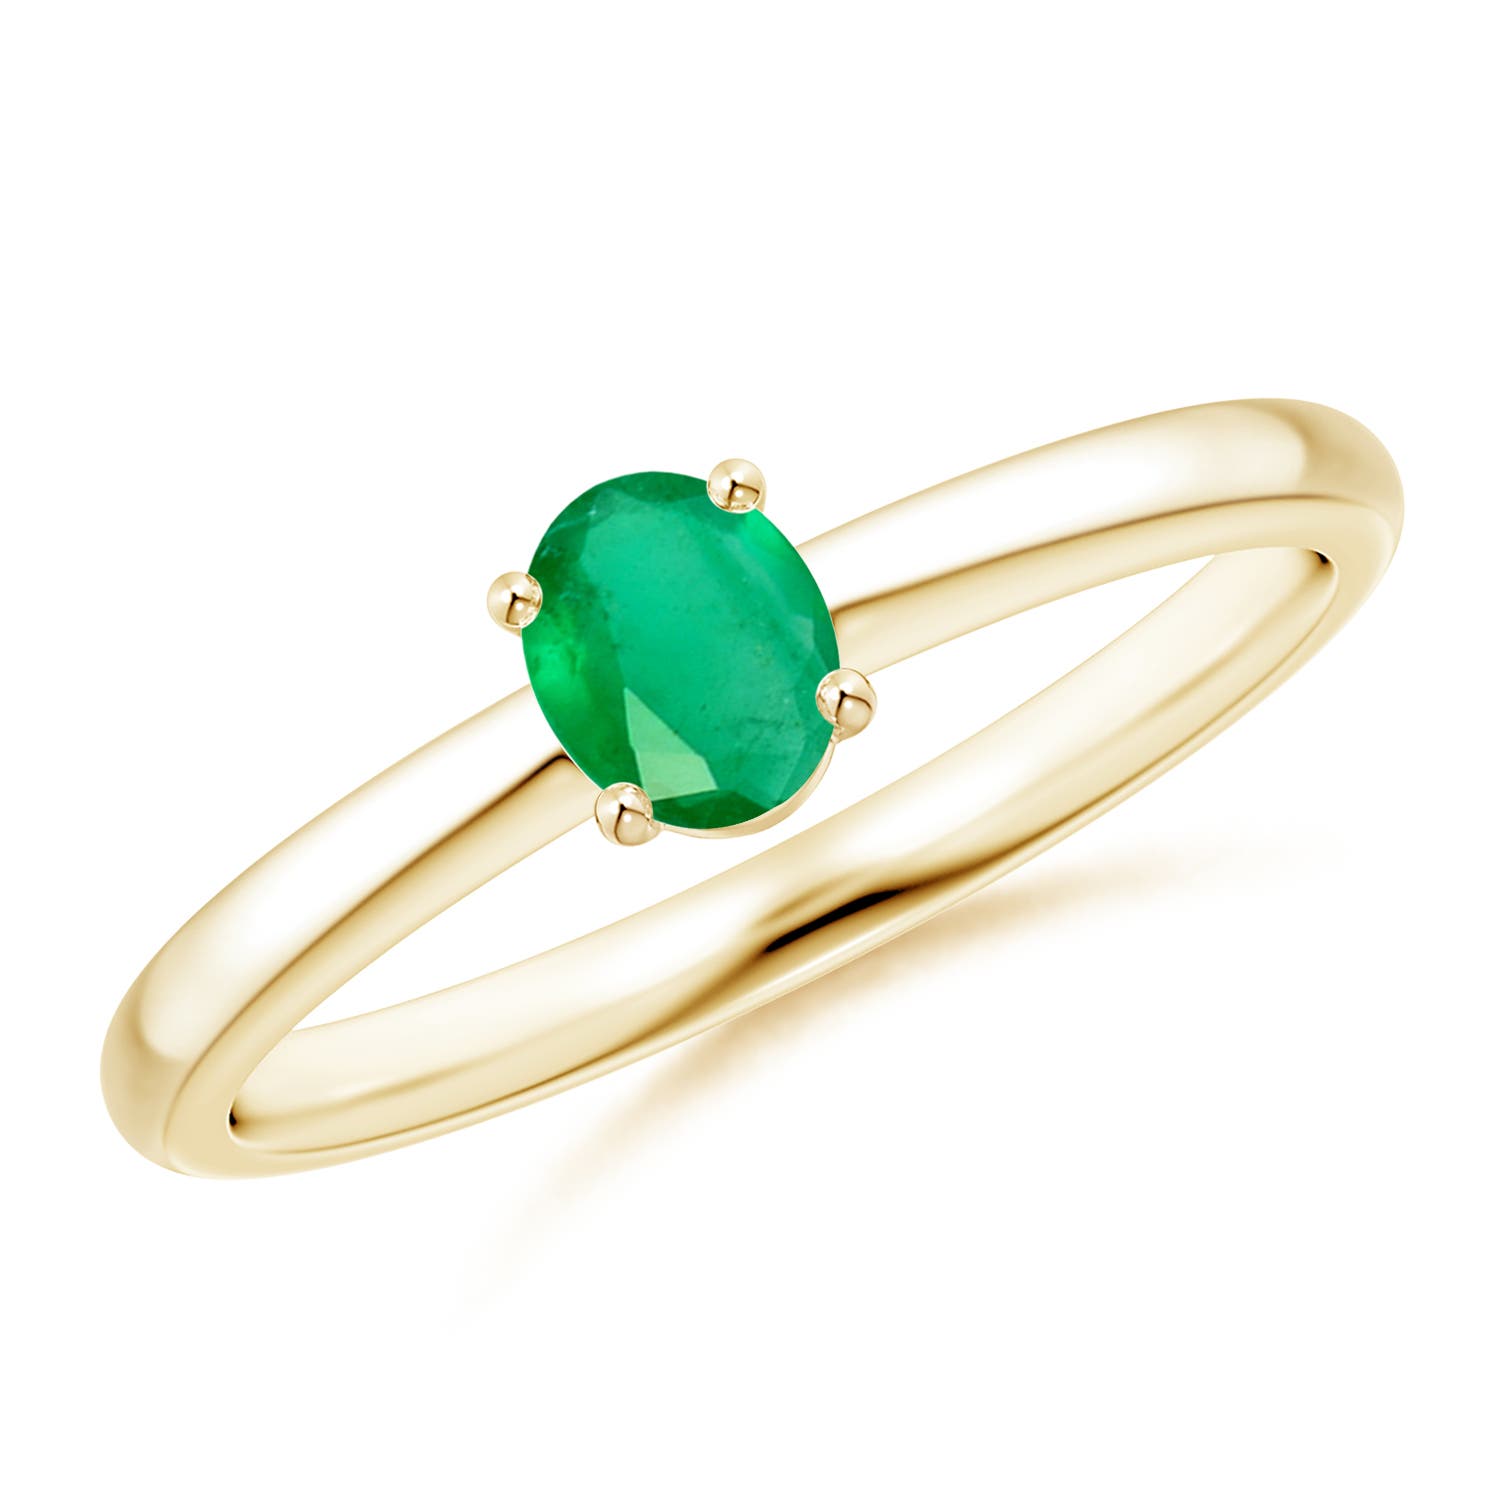 A - Emerald / 0.3 CT / 14 KT Yellow Gold